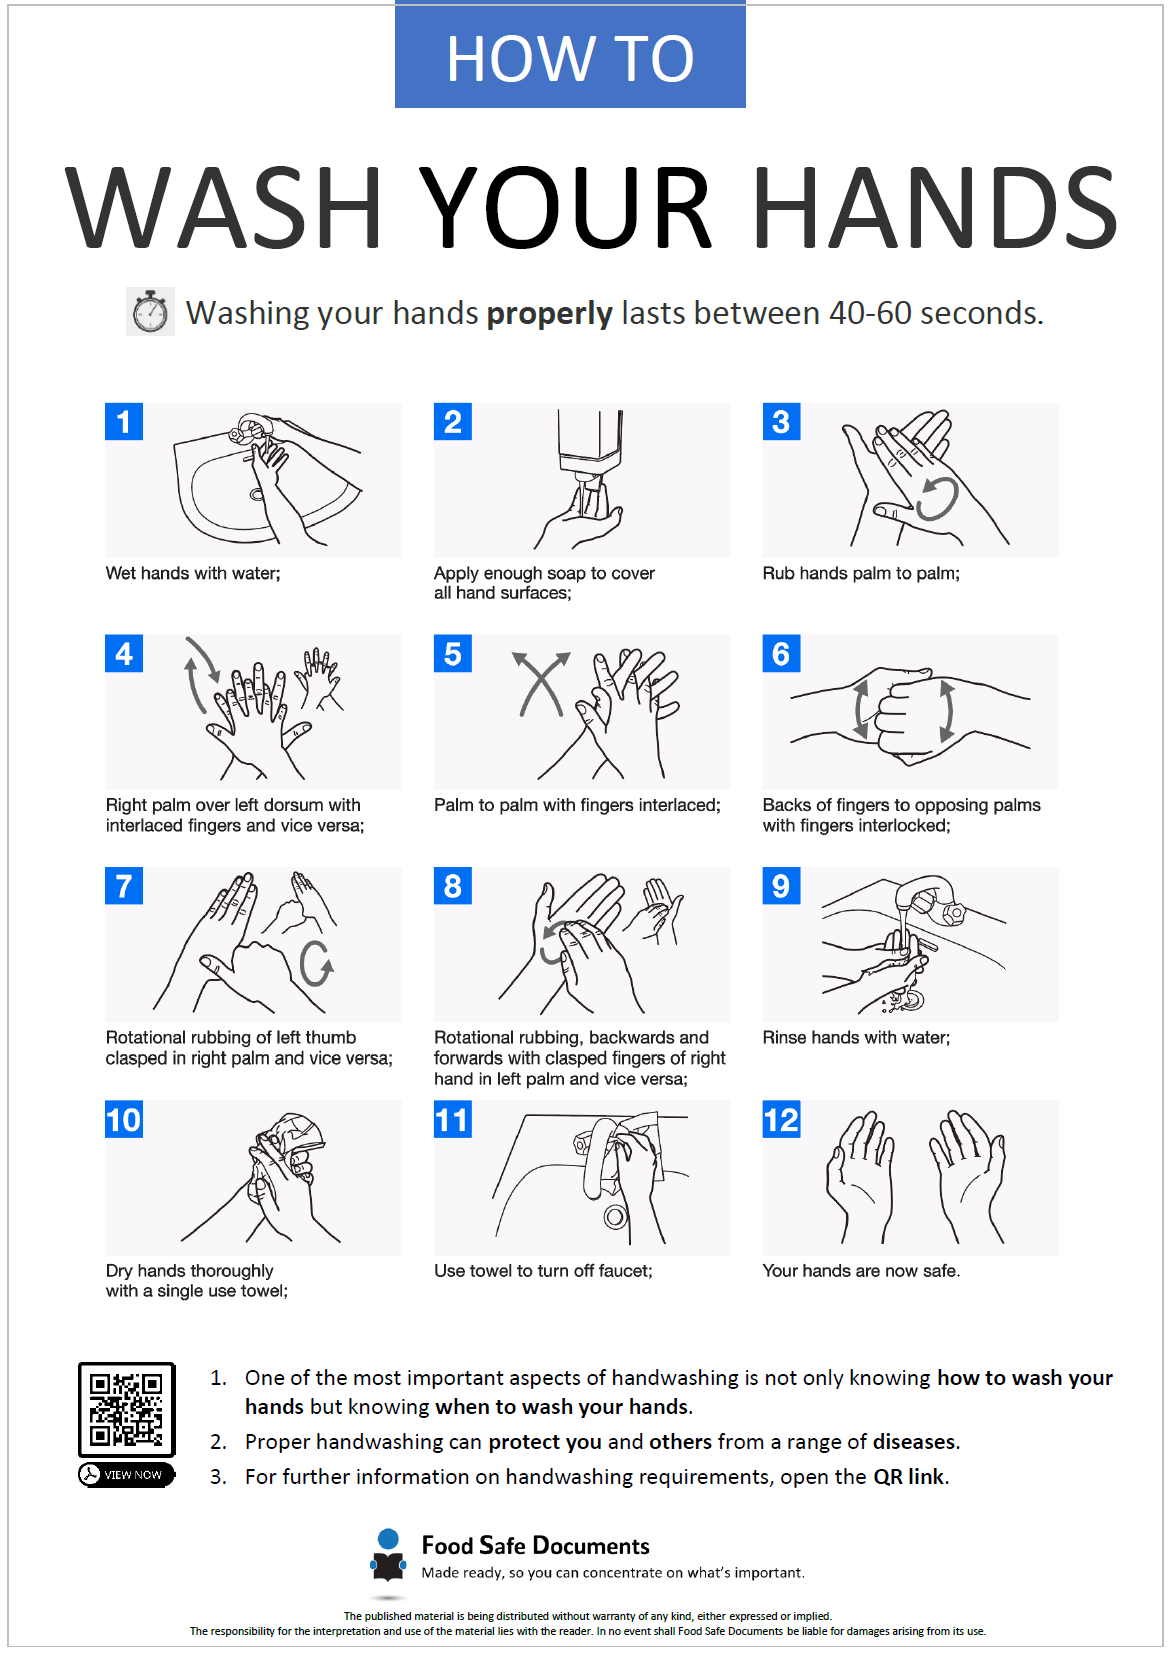 How to wash your hands - Food Safe Documents